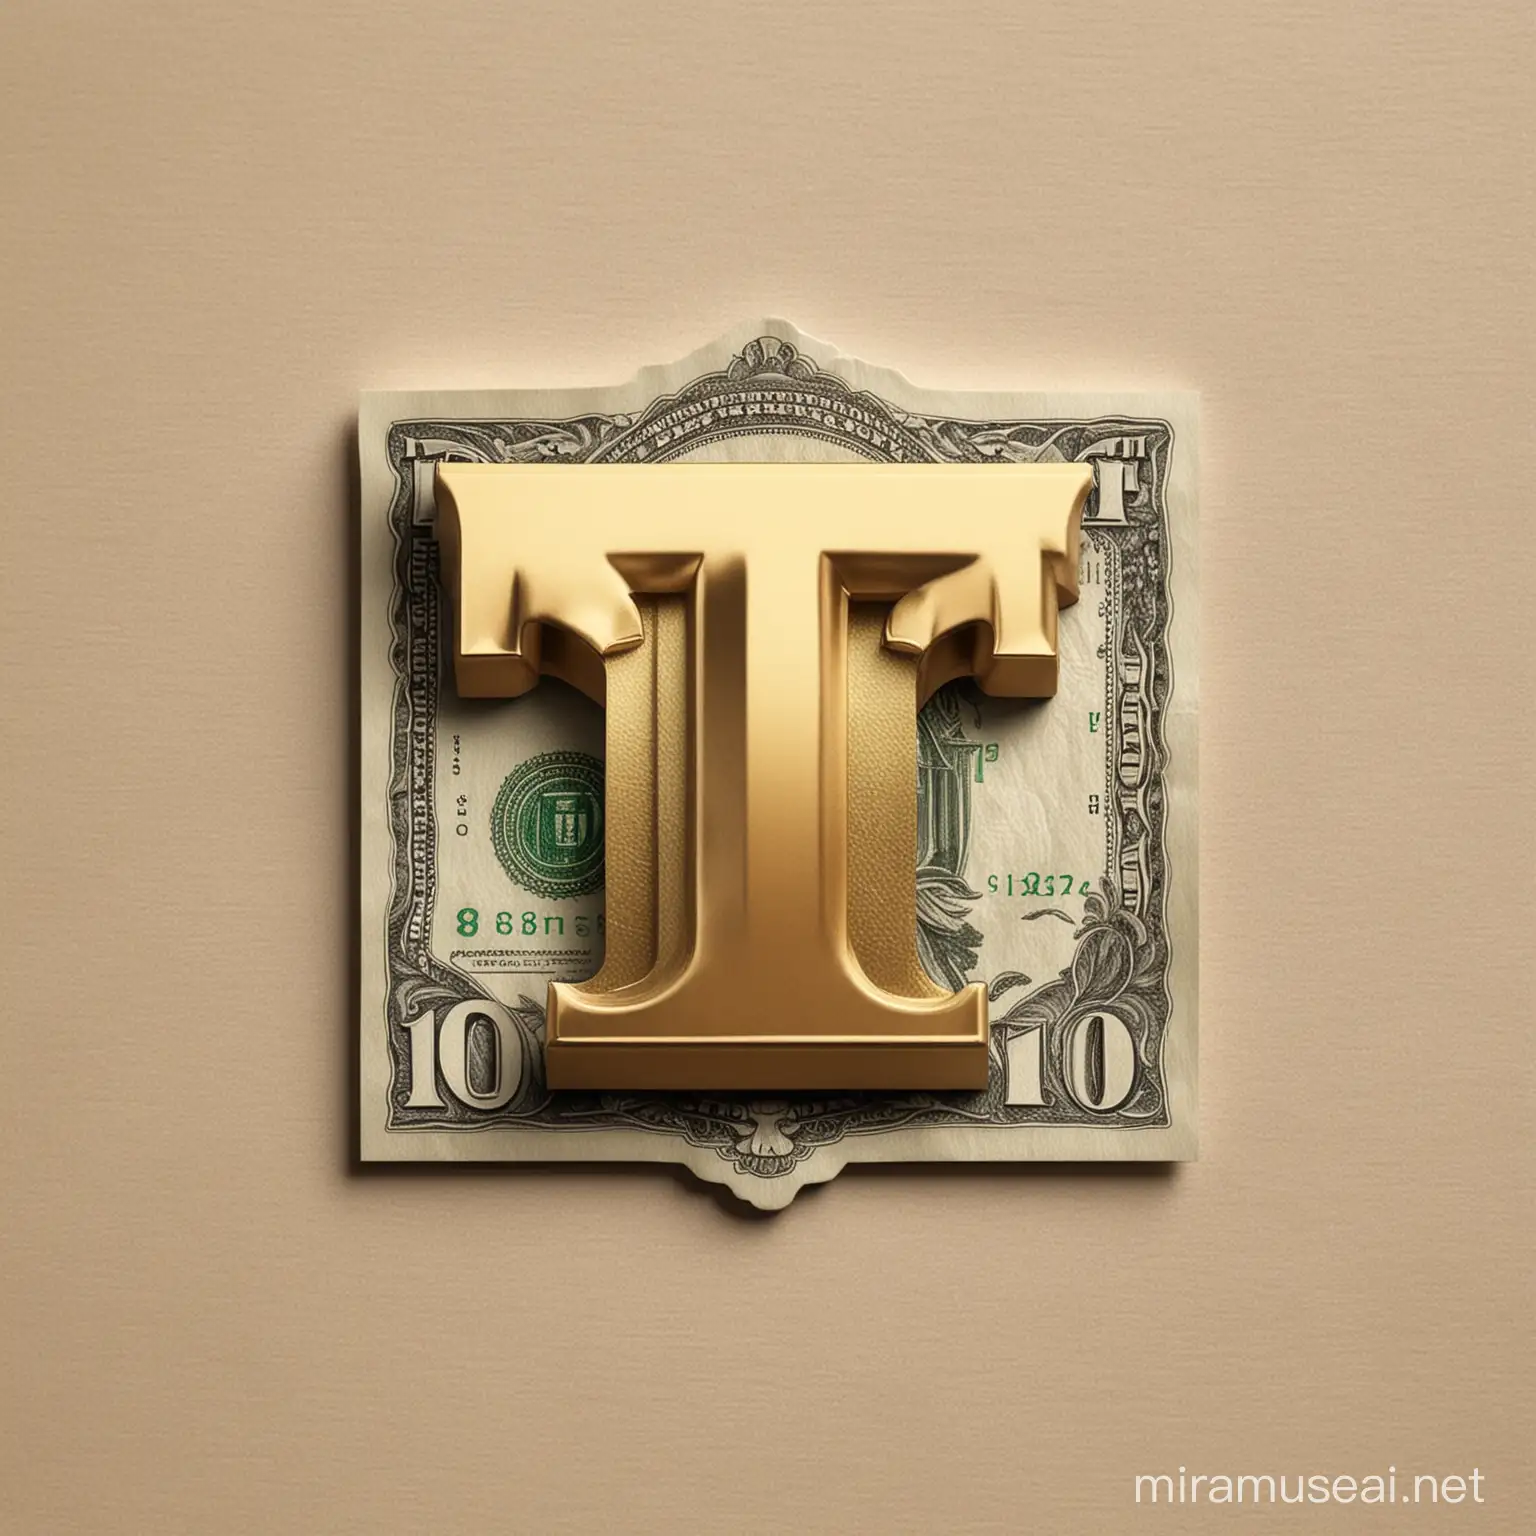 Create a logo with the letter T on it. The background should be sleek. This is used as a logo for a profile picture of a social media page. Now improve on this logo by adding 100 dollar bills in the background. Please make the “T” gold. 